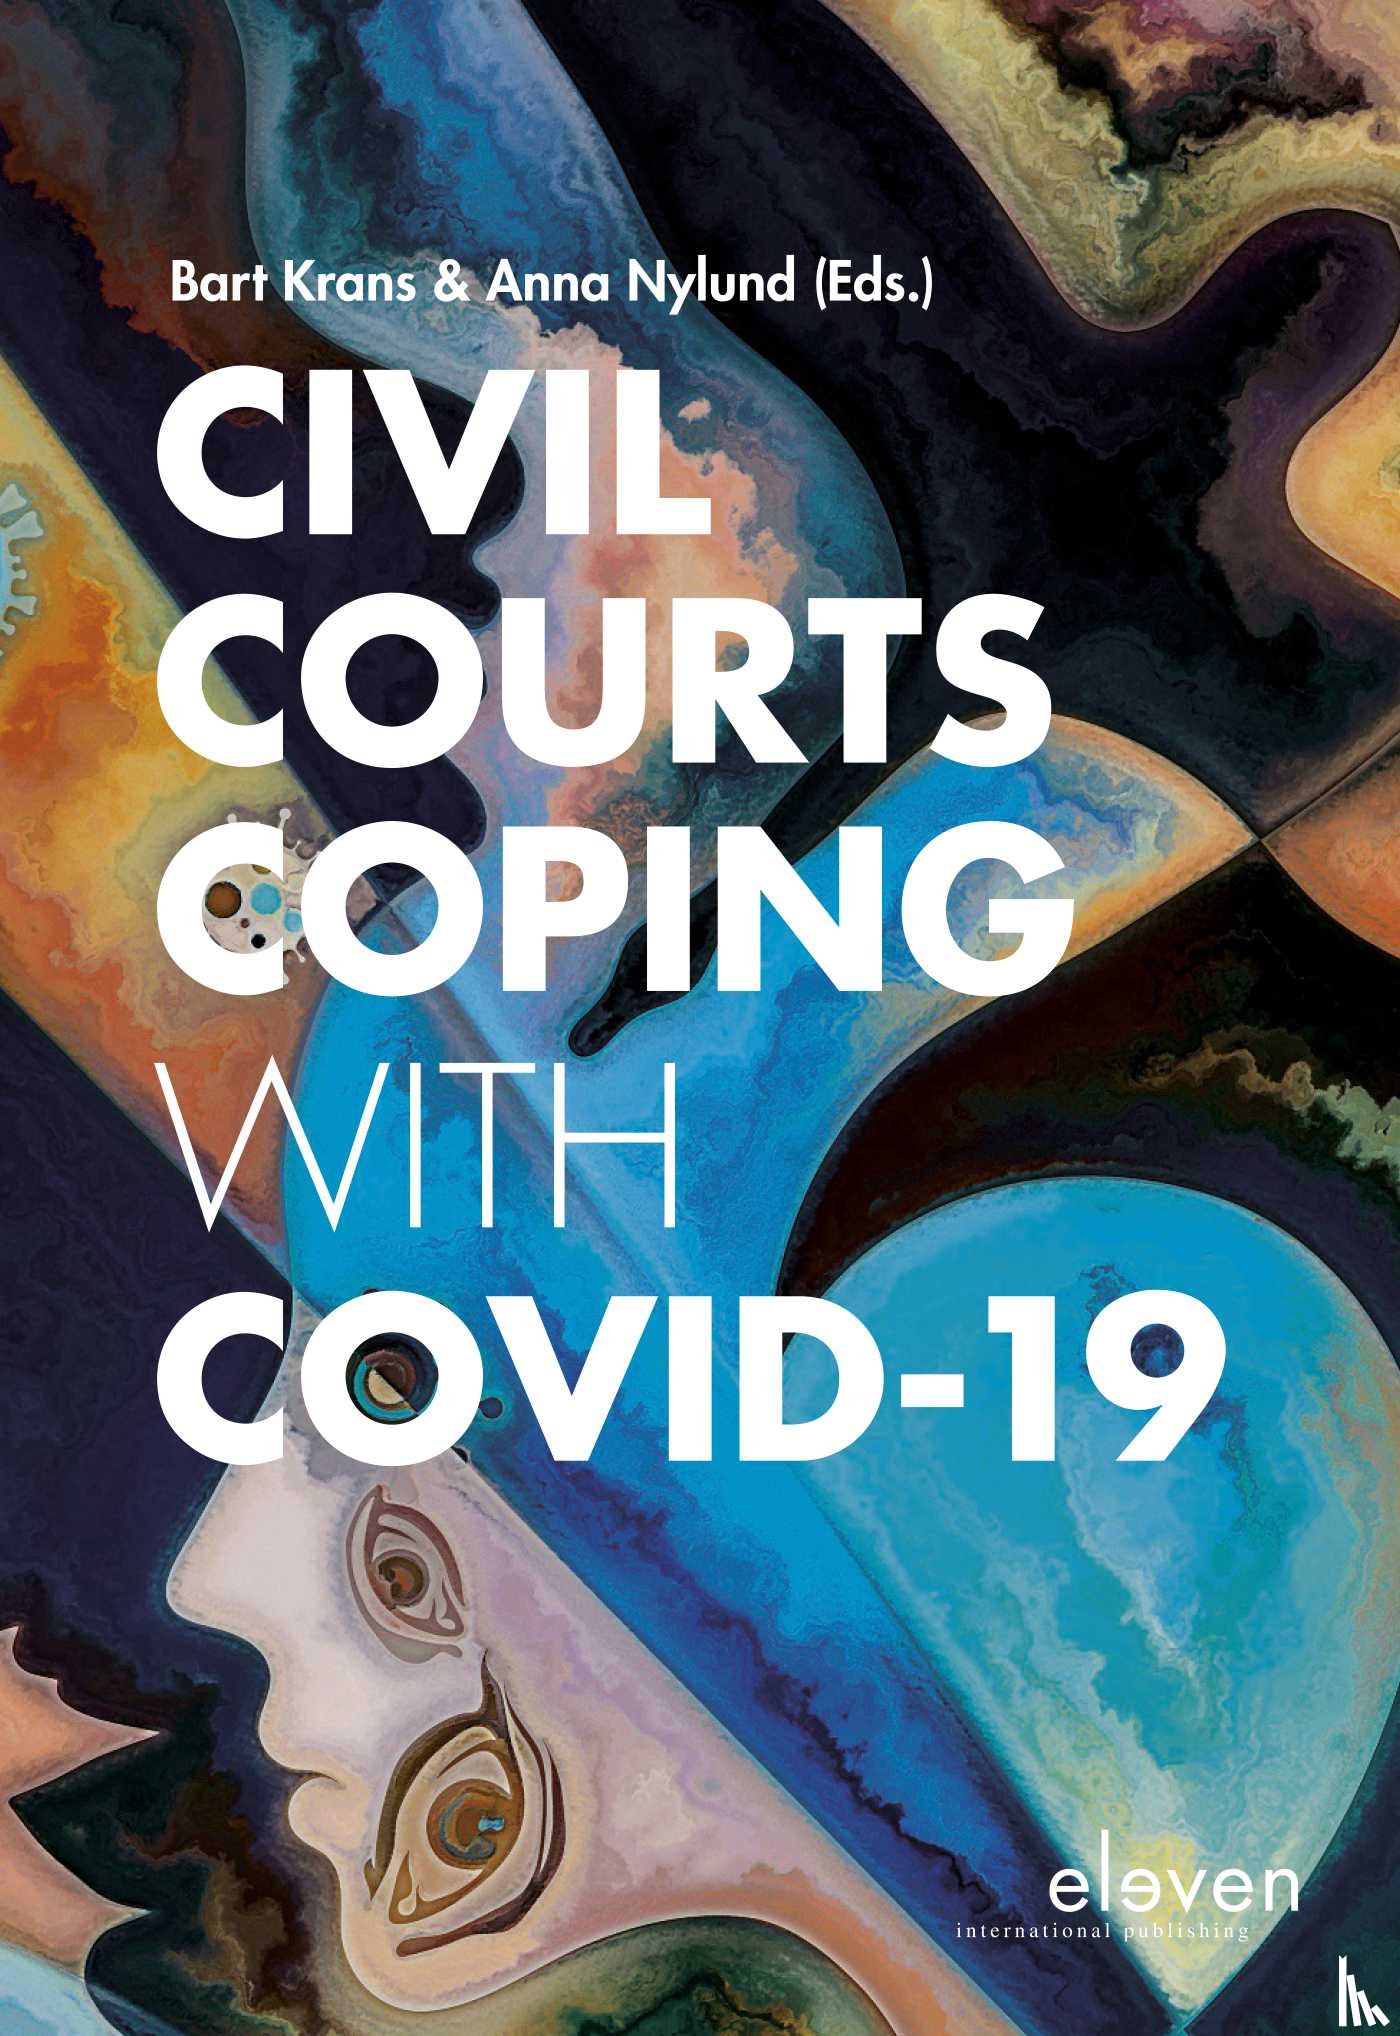  - Civil Courts Coping with Covid-19